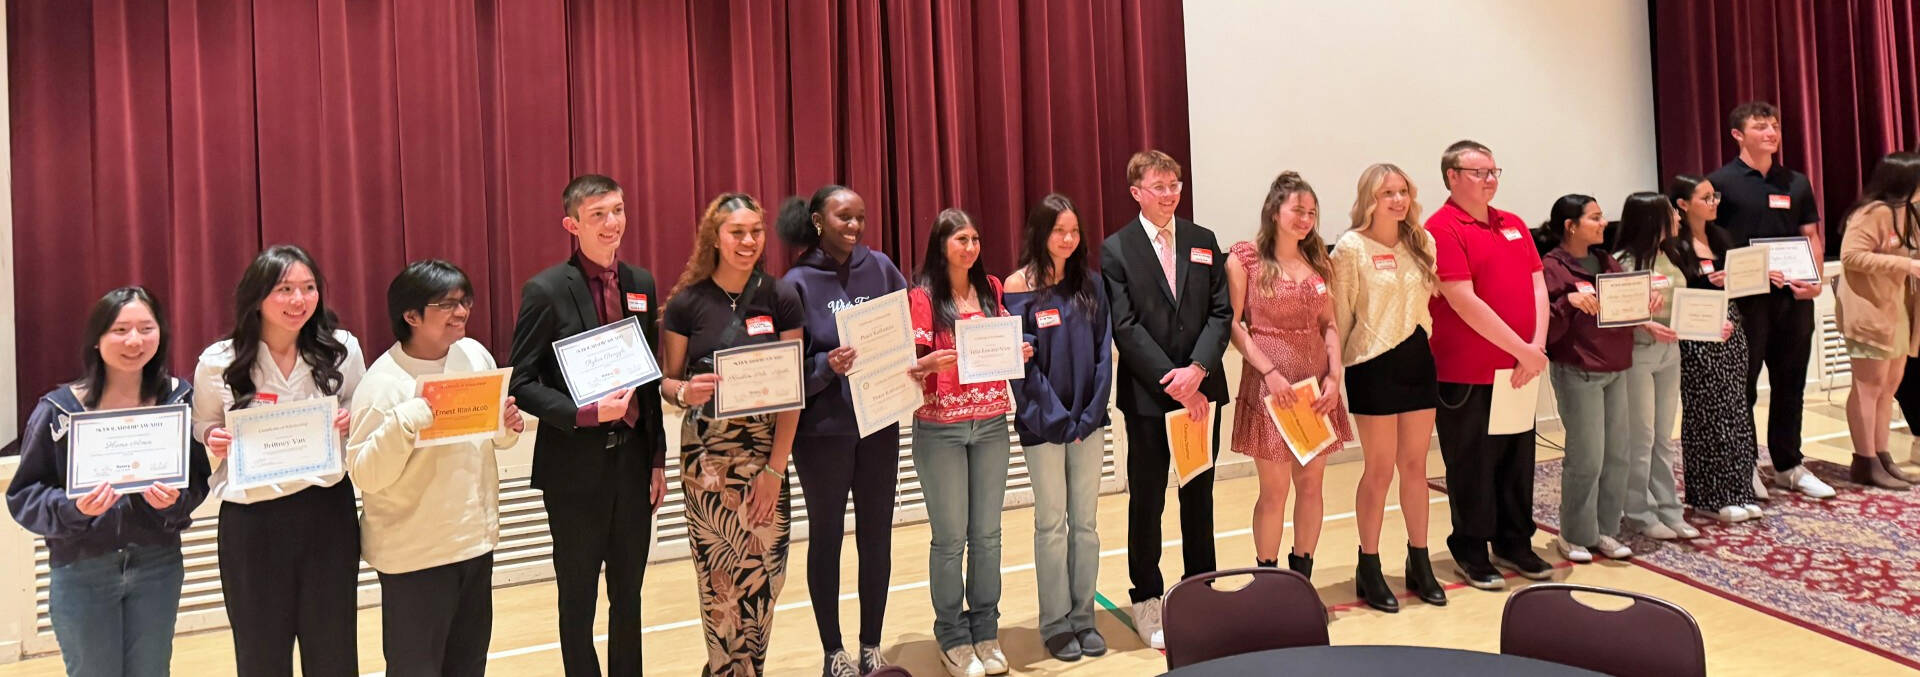 Winners of high school scholarship awards as presented by the Kent Community Foundation. COURTESY PHOTO, Kent Community Foundation